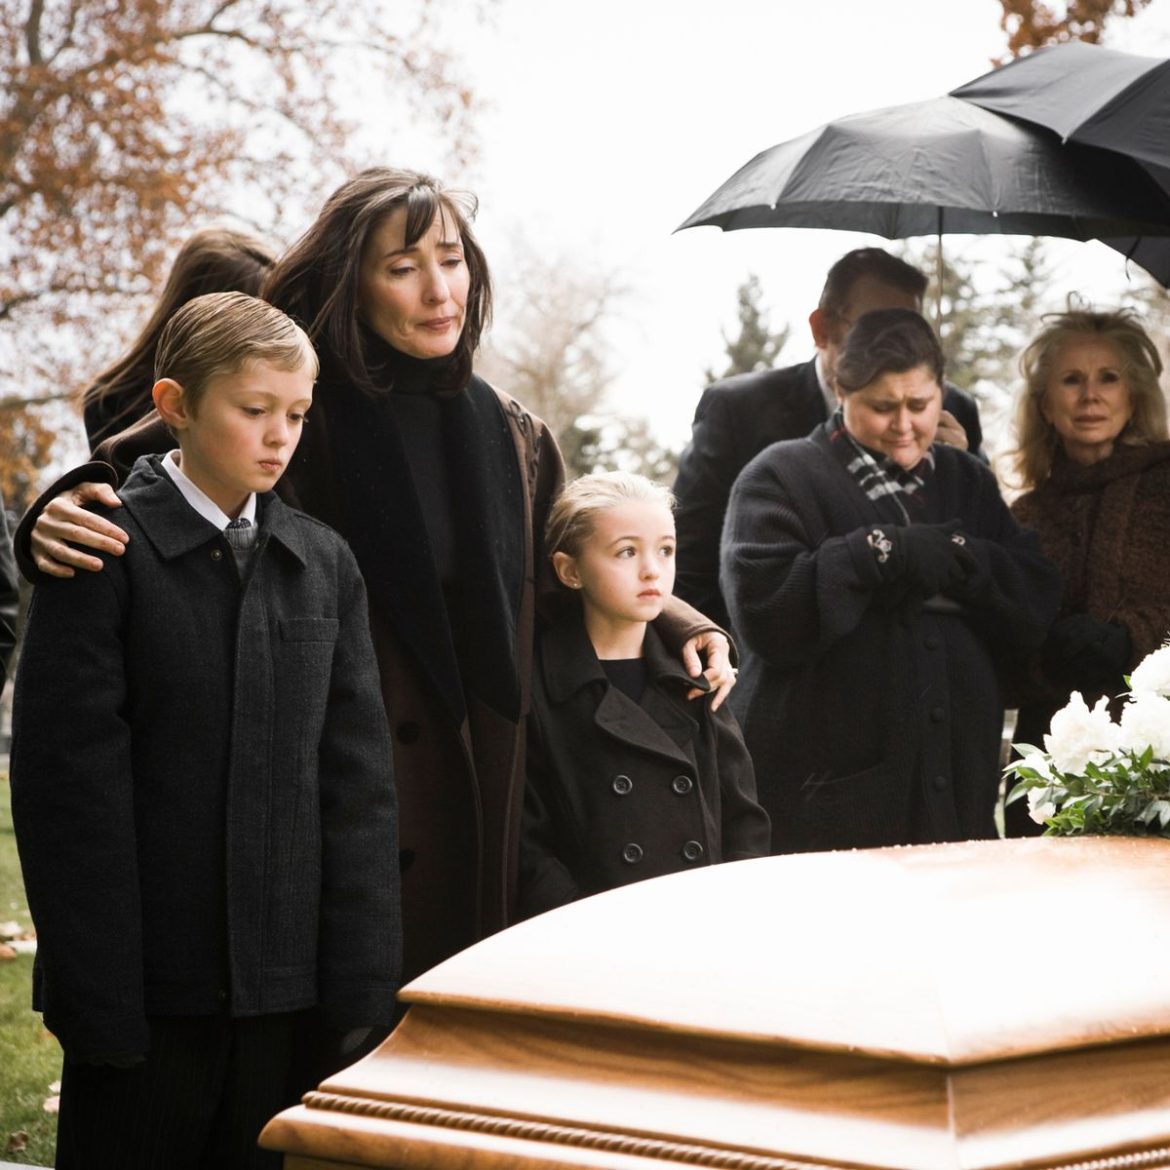 Funeral service industry – an overview